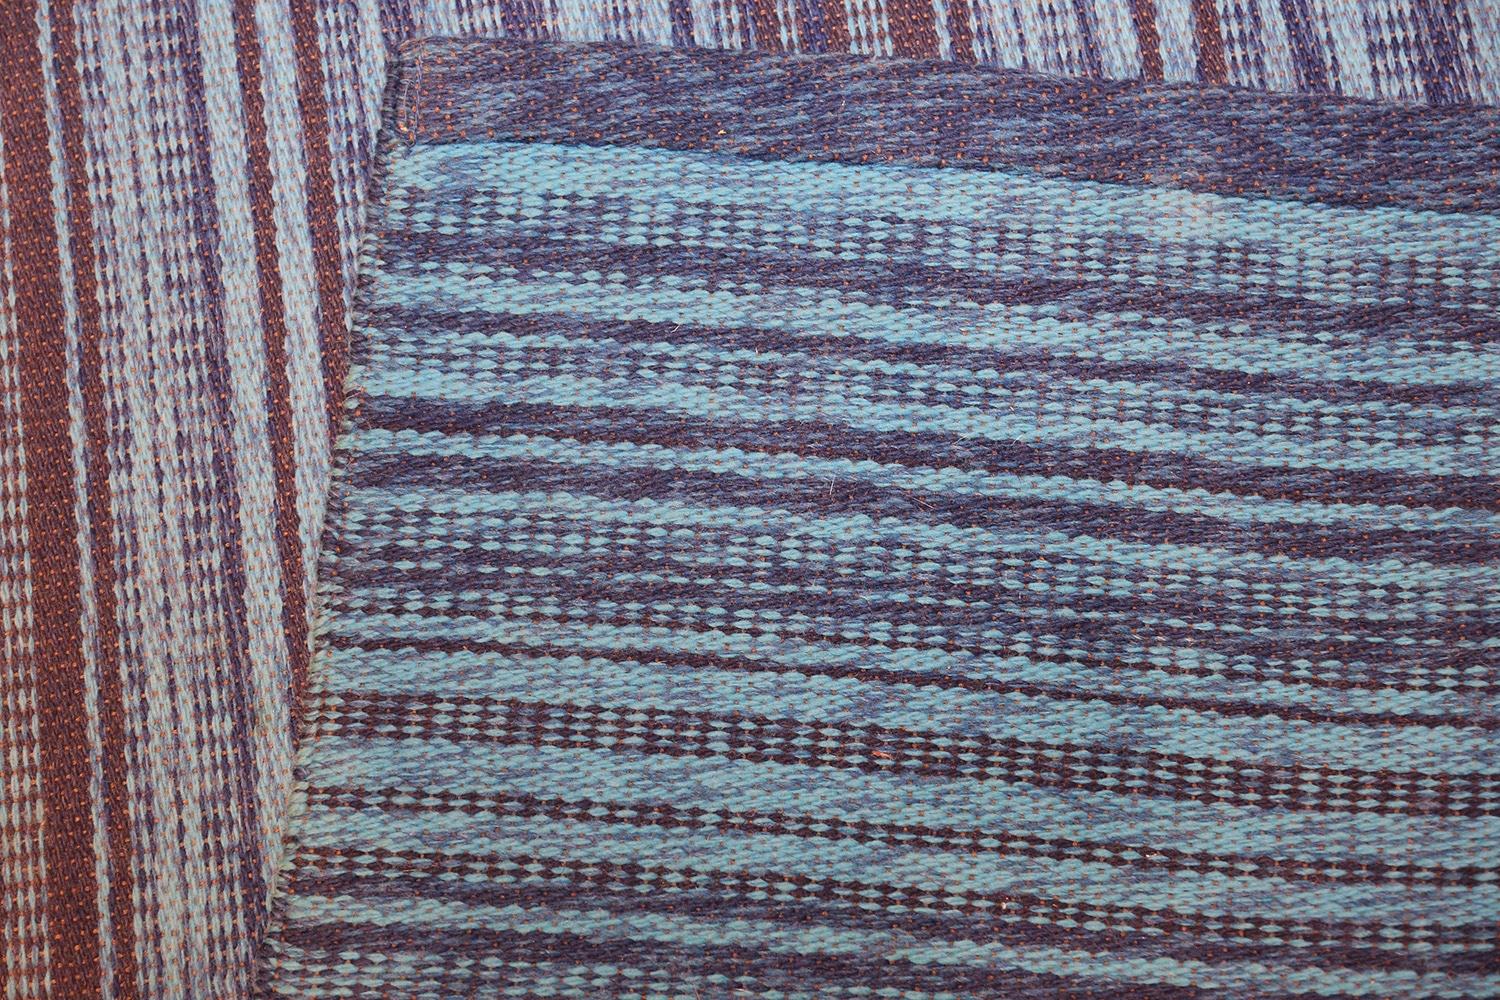 Vintage Double Sided Blue Background Swedish Kilim Rug, Country Of Origin: Sweden, Circa Date: Mid 20th Century. Size: 6 ft 5 in x 9 ft 8 in (1.96 m x 2.95 m)

